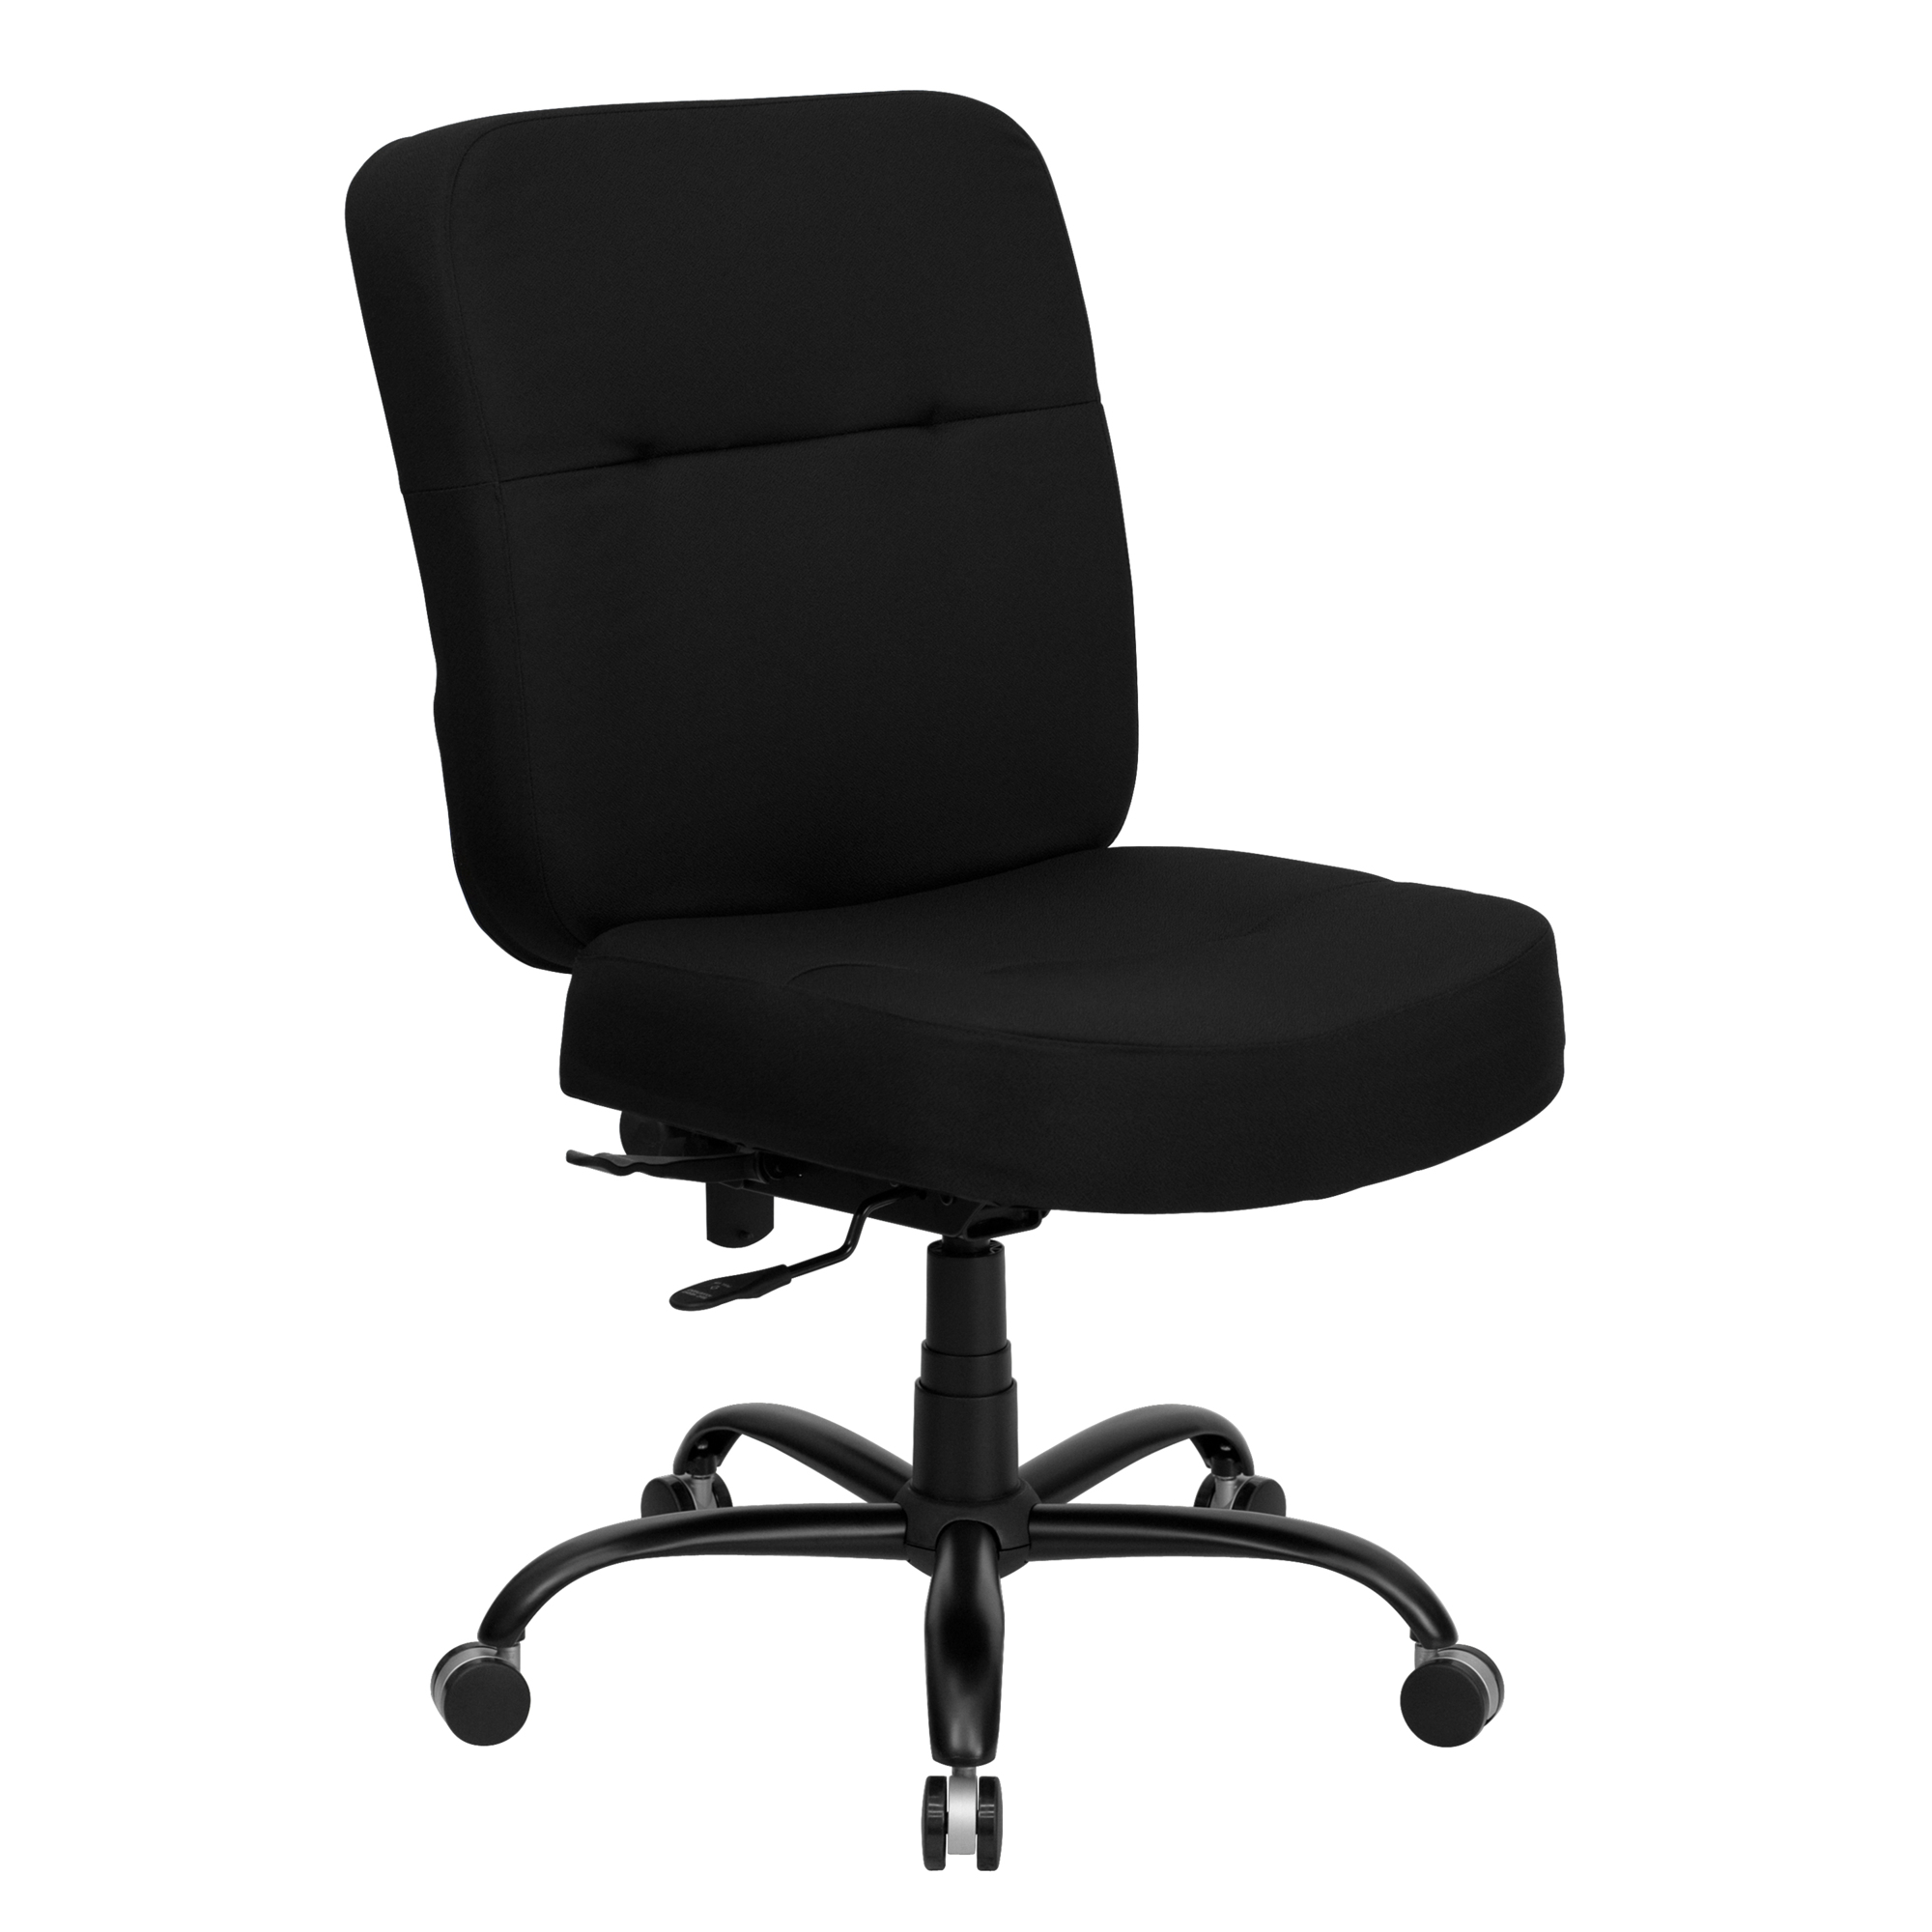 Flash Furniture, 400 lb. Rated High Back Black Fabric Office Chair, Primary Color Black, Included (qty.) 1, Model WL735SYGBK